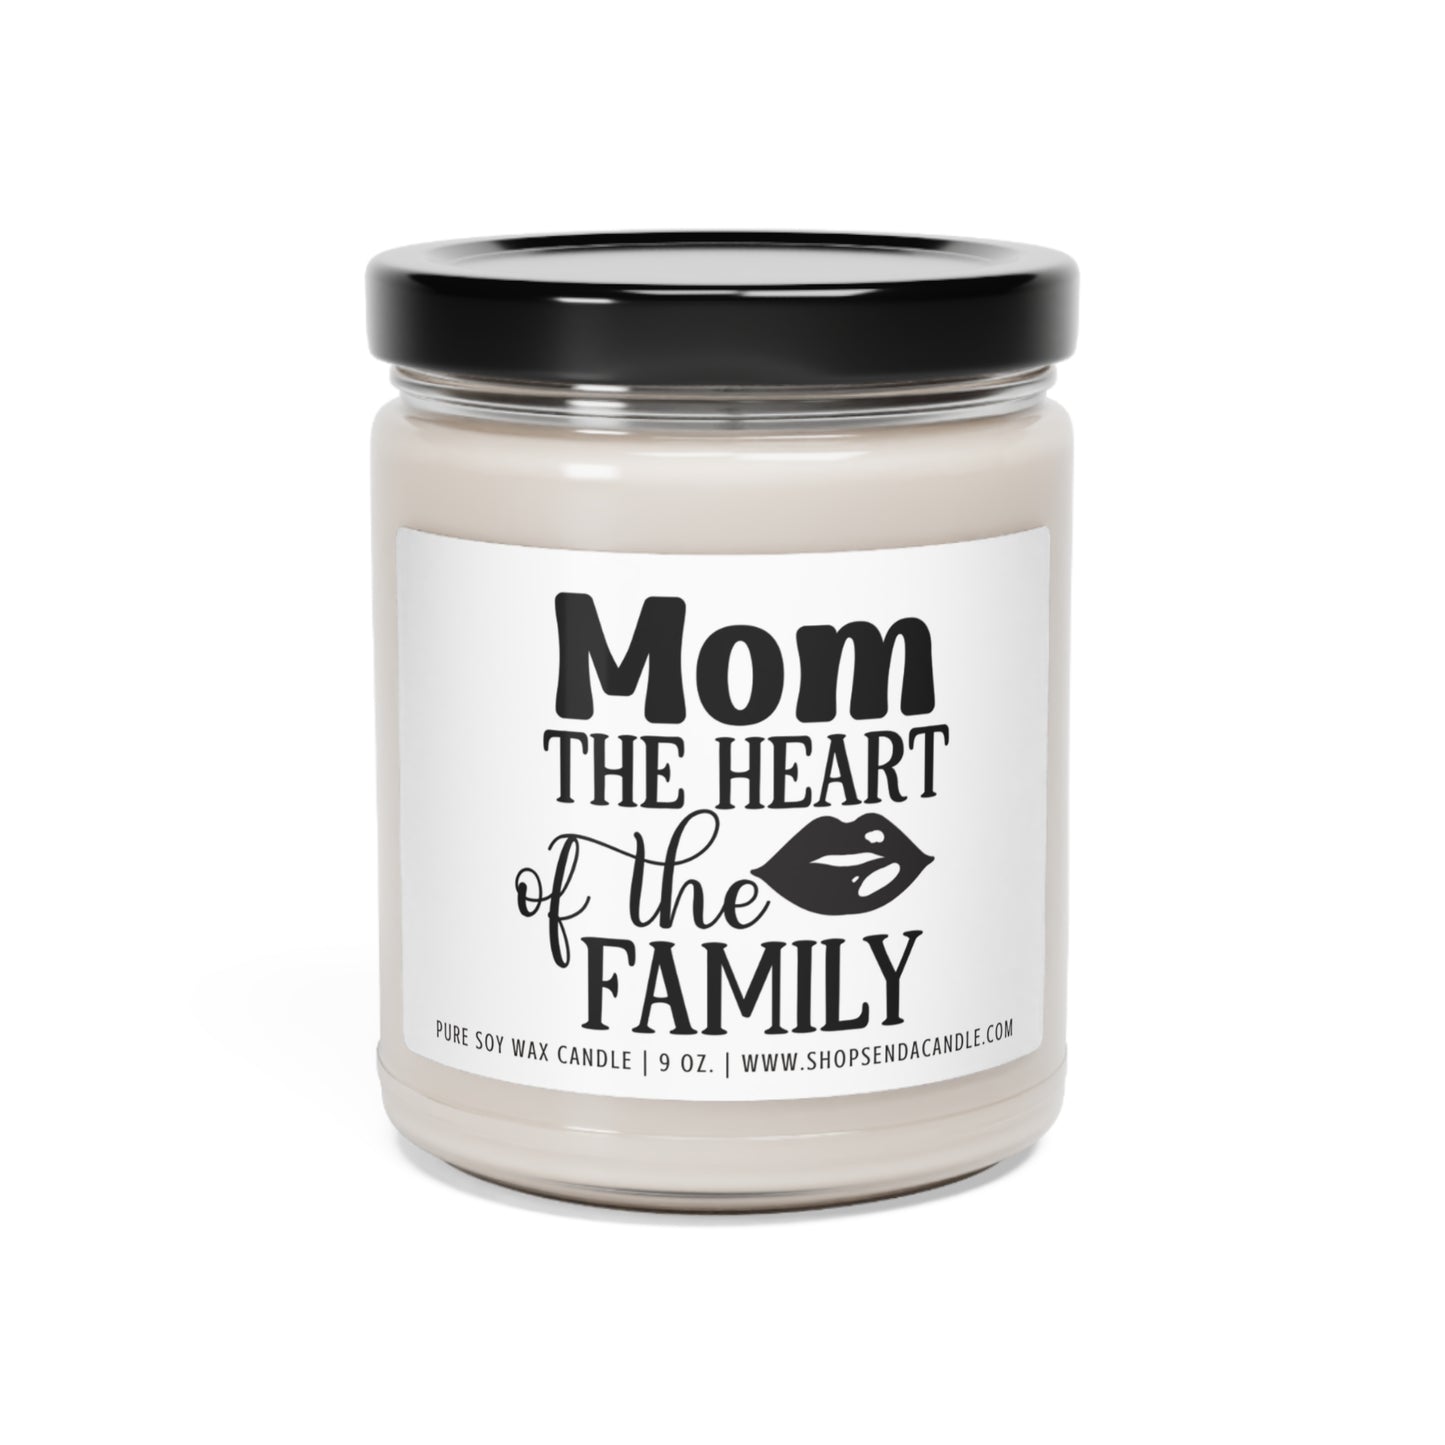 Mothers Day Gift Delivery | Send A Candle